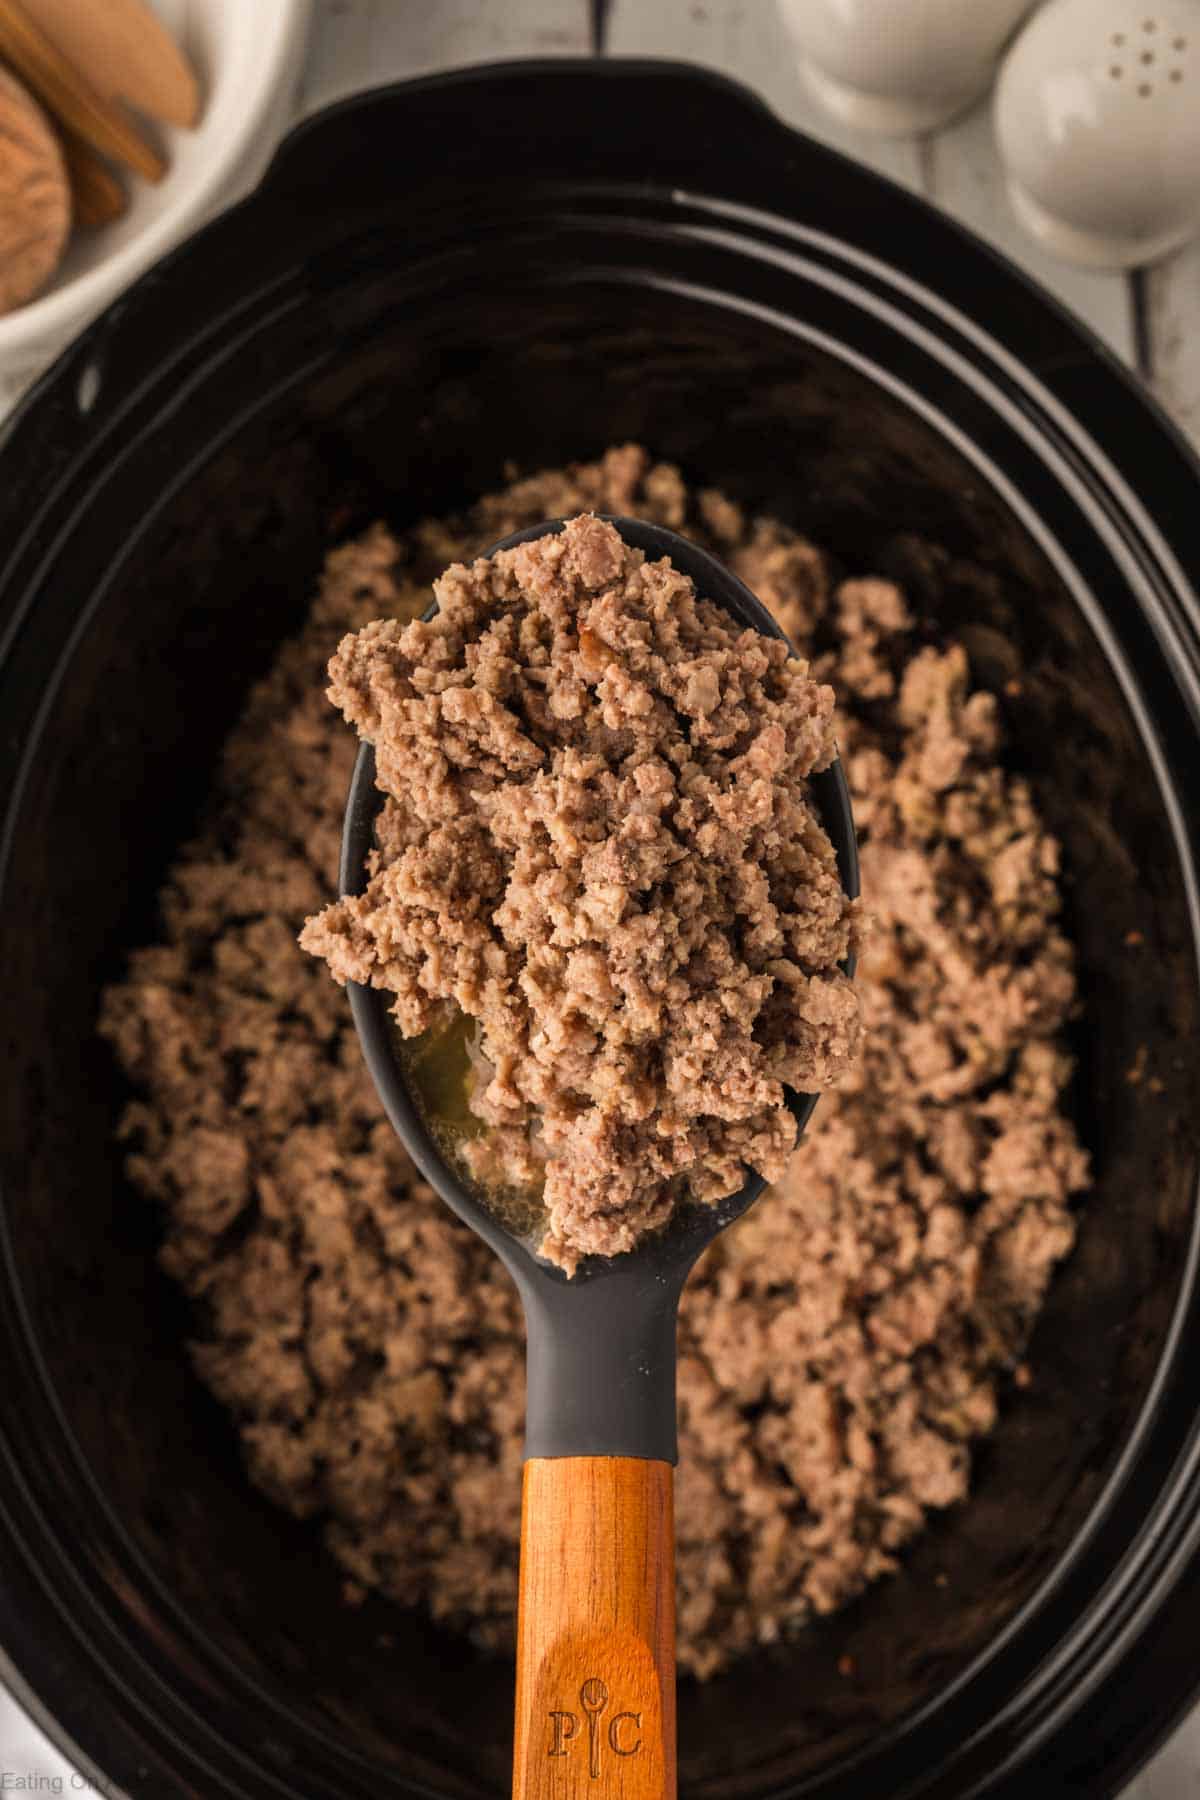 Ground beef in the slow cooker with a serving on a wooden spoon